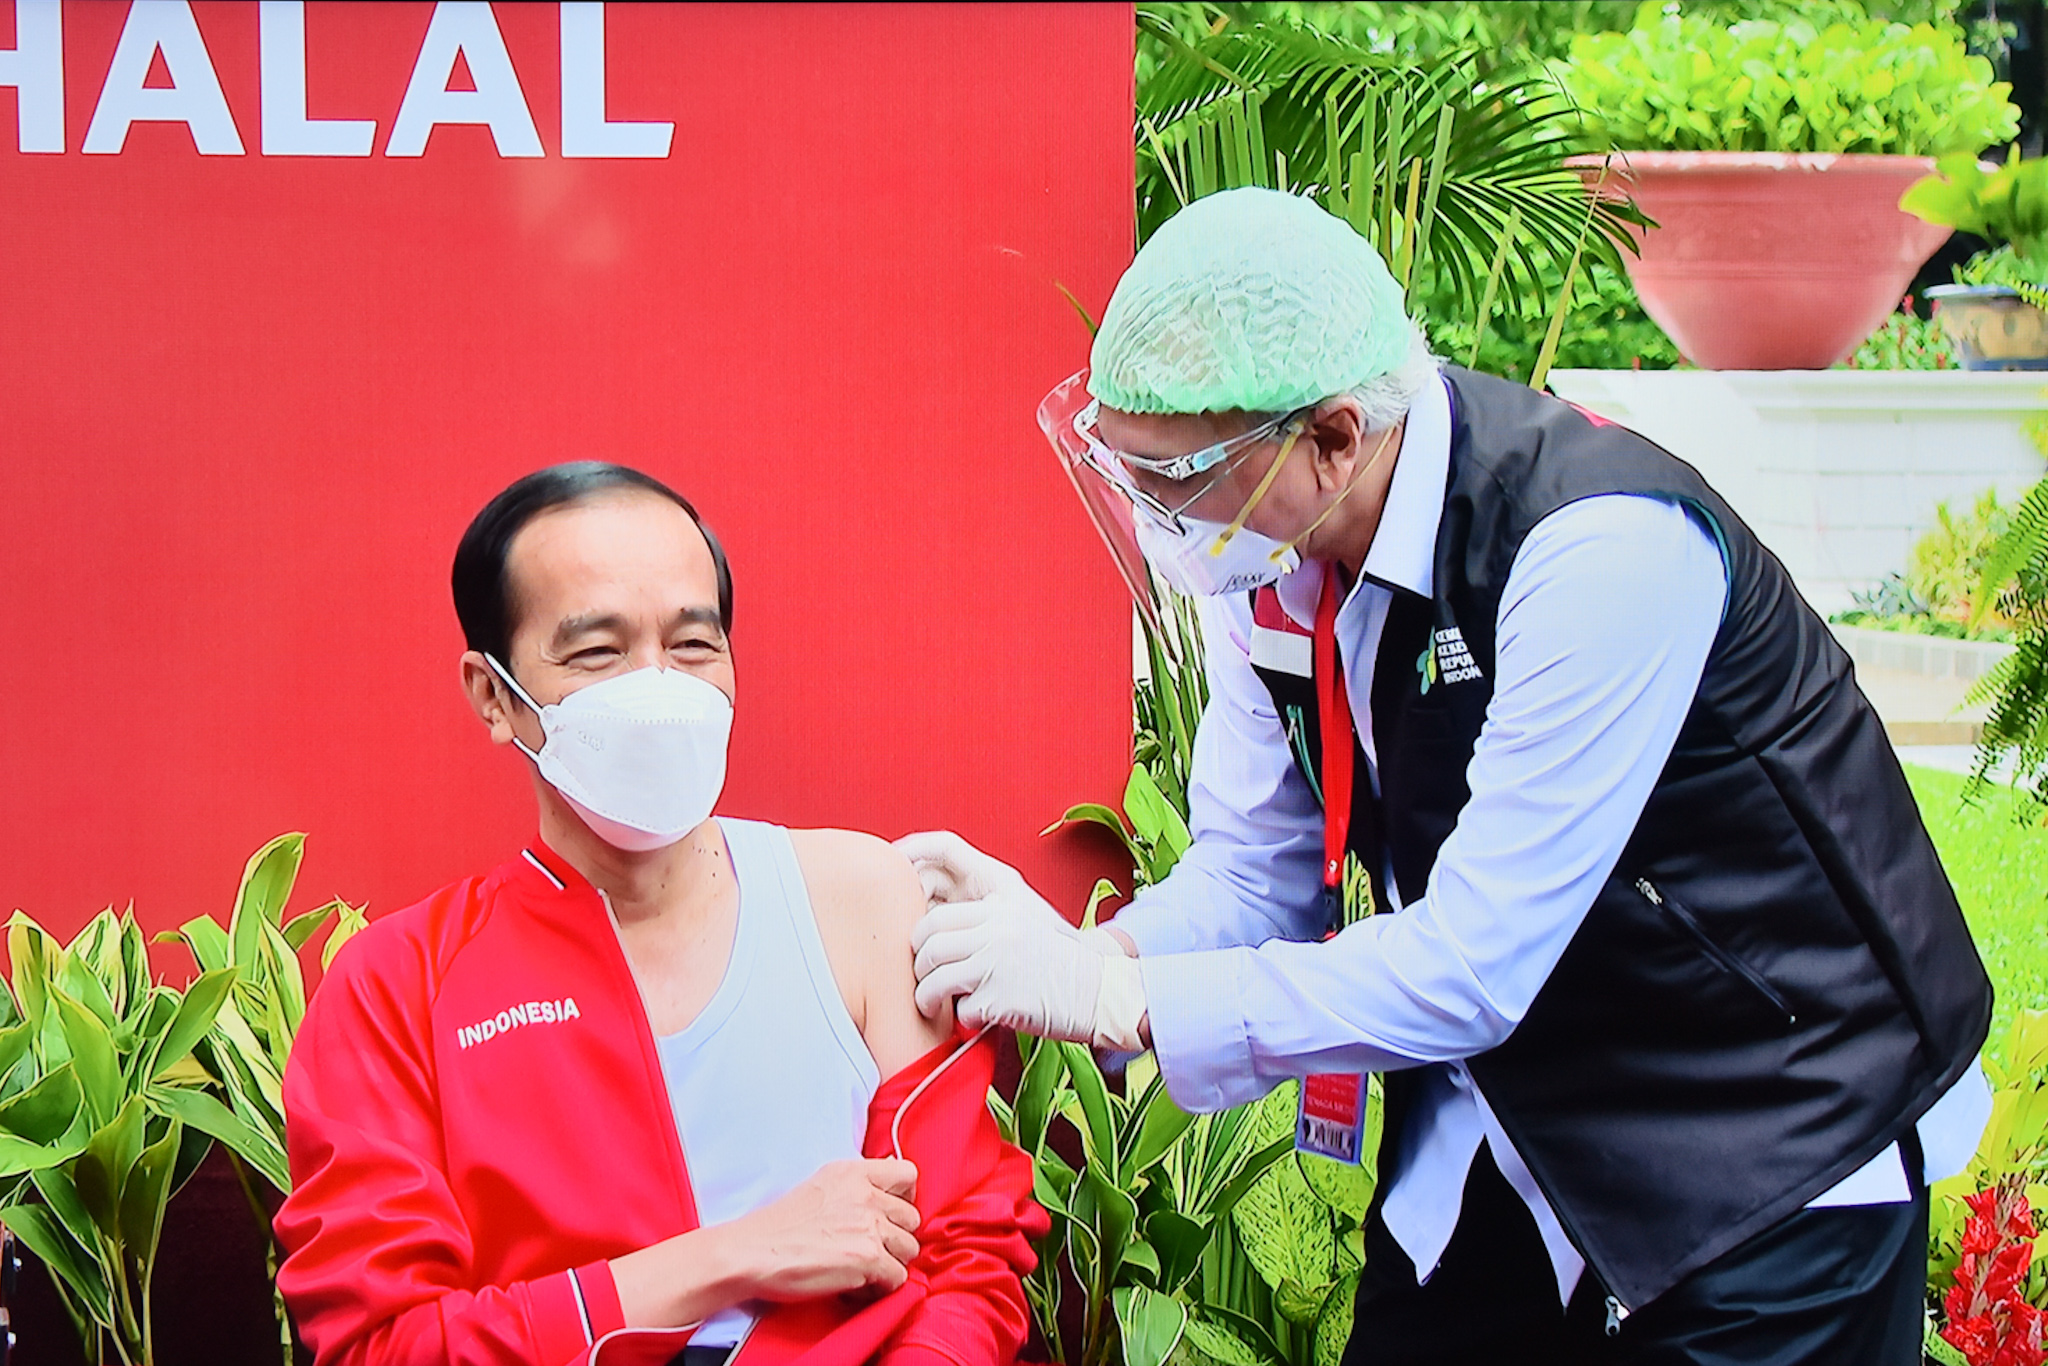 COVID-19 – Indonesian president receives second dose of vaccine